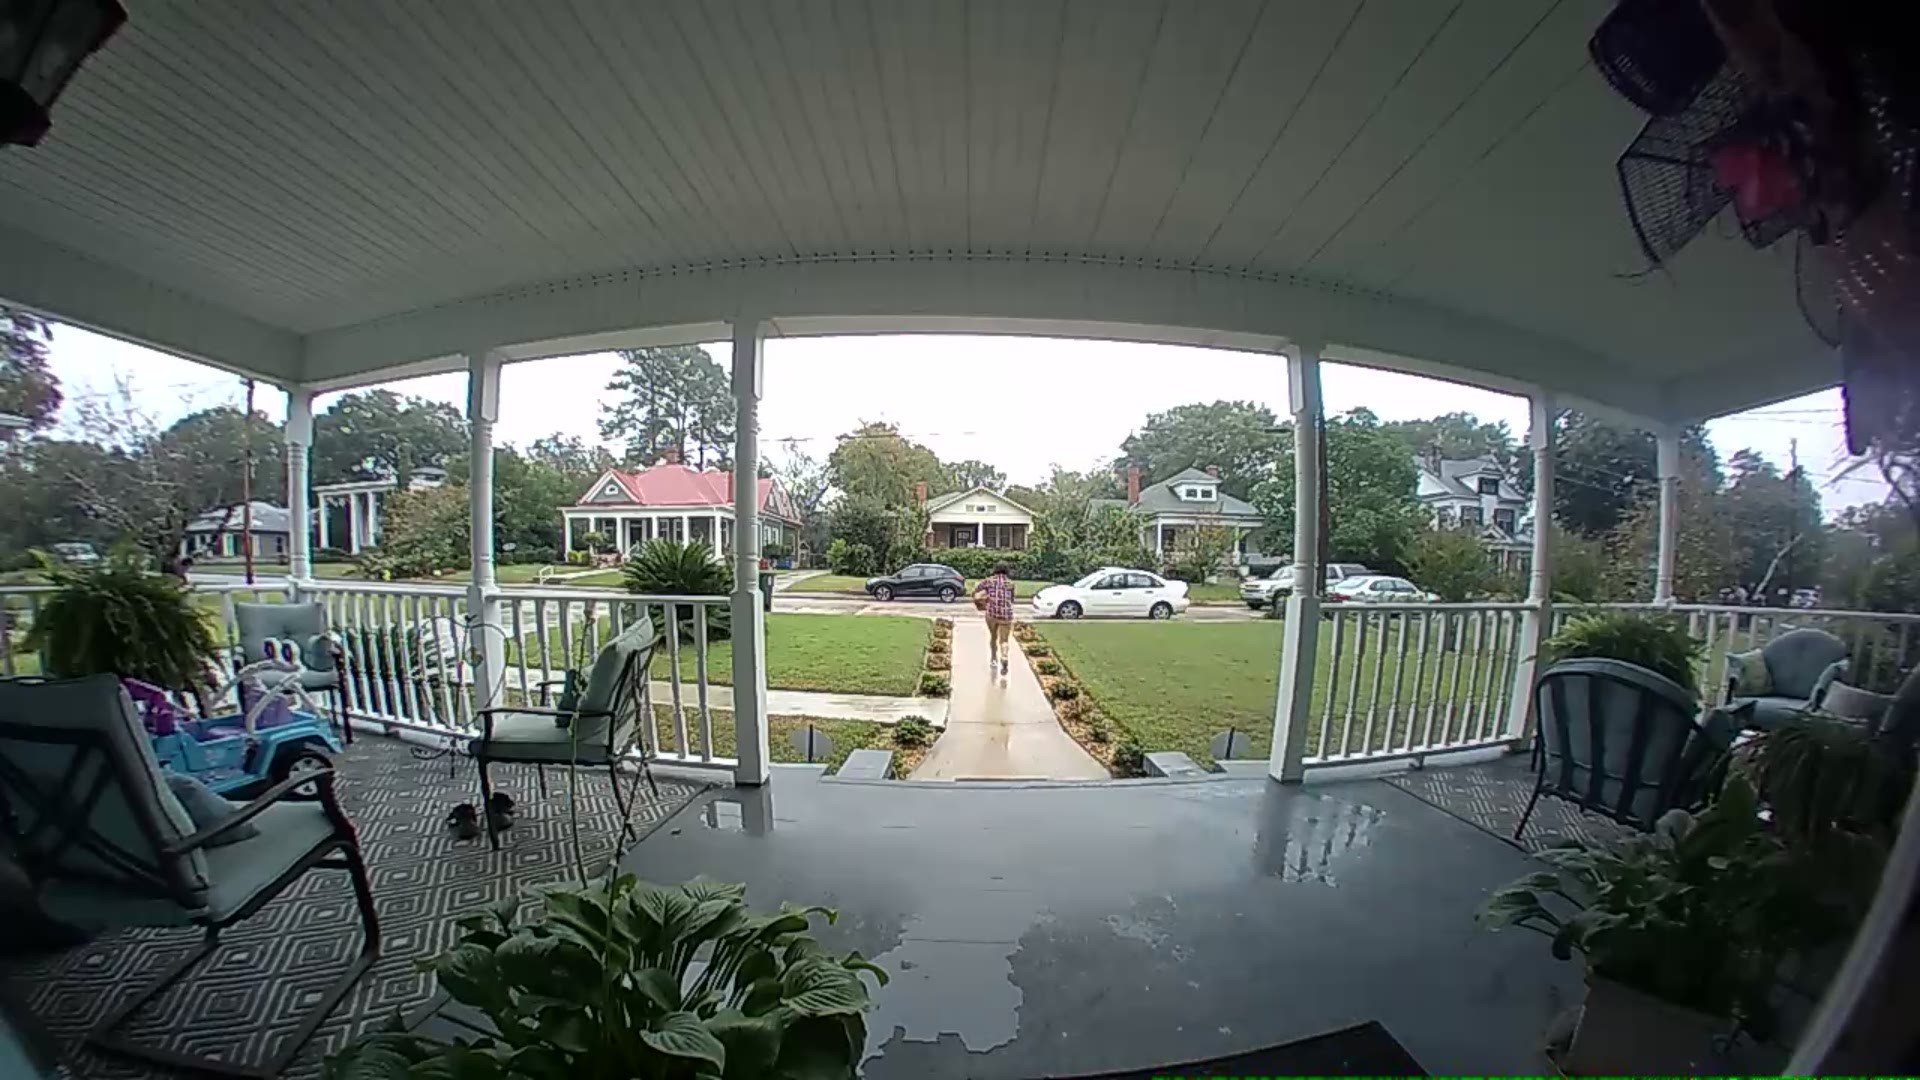 The Bibb County Sheriff's Office needs help identifying a woman caught on camera stealing packages from someone's porch